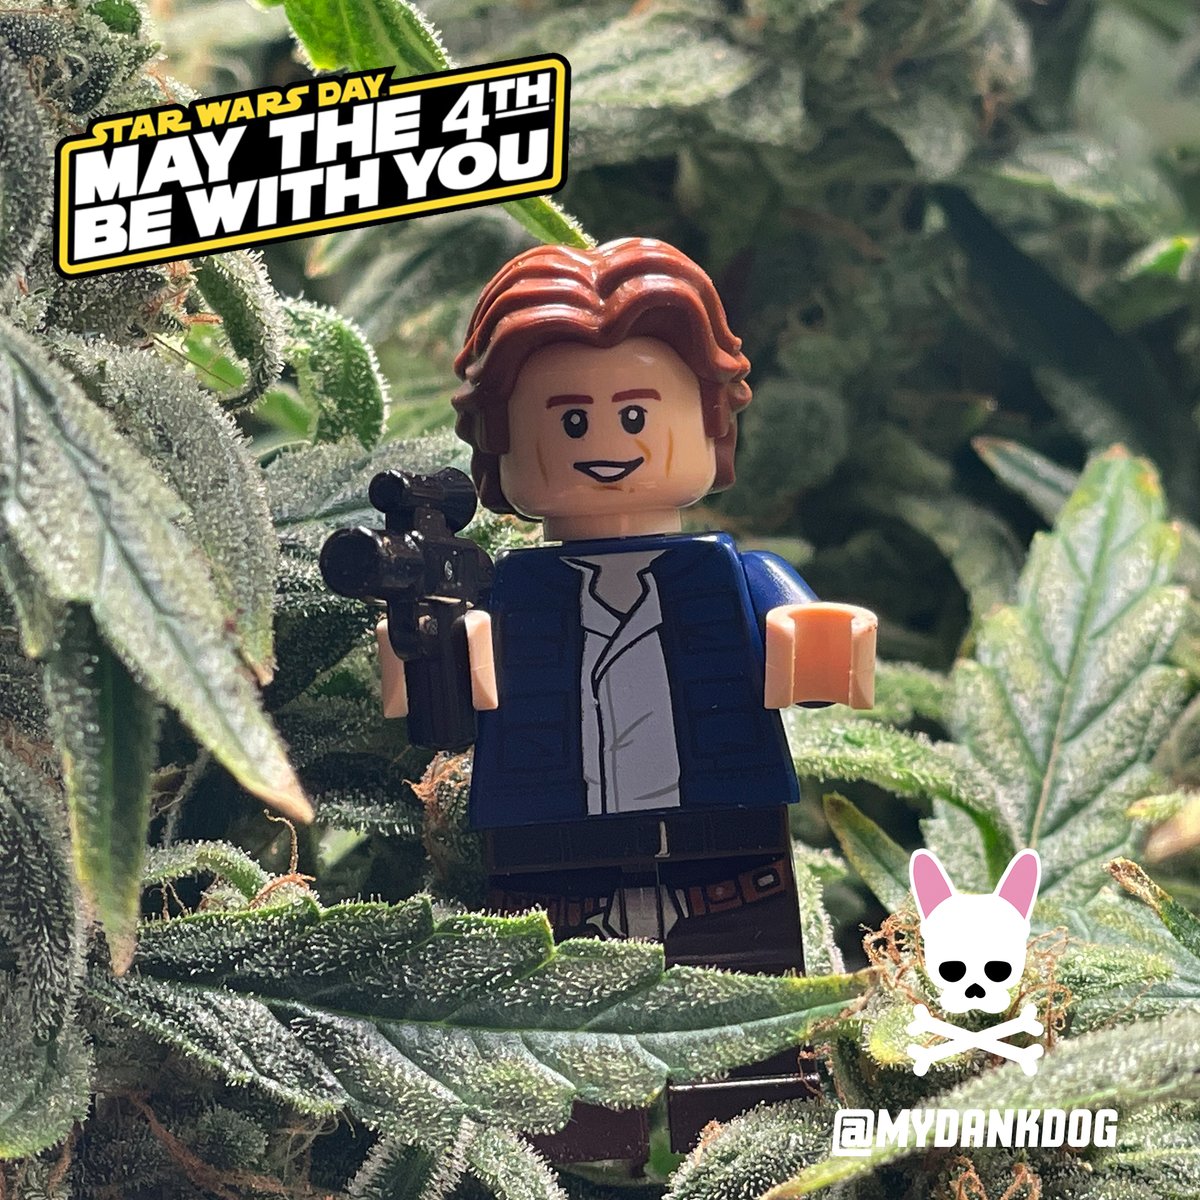 MAY THE 4th BE WITH YOU! #weed #cannabis #thc #cbd #sativa #indica #terpenes #autoflower #trichomes #growmies #Maythe4thBeWithYou